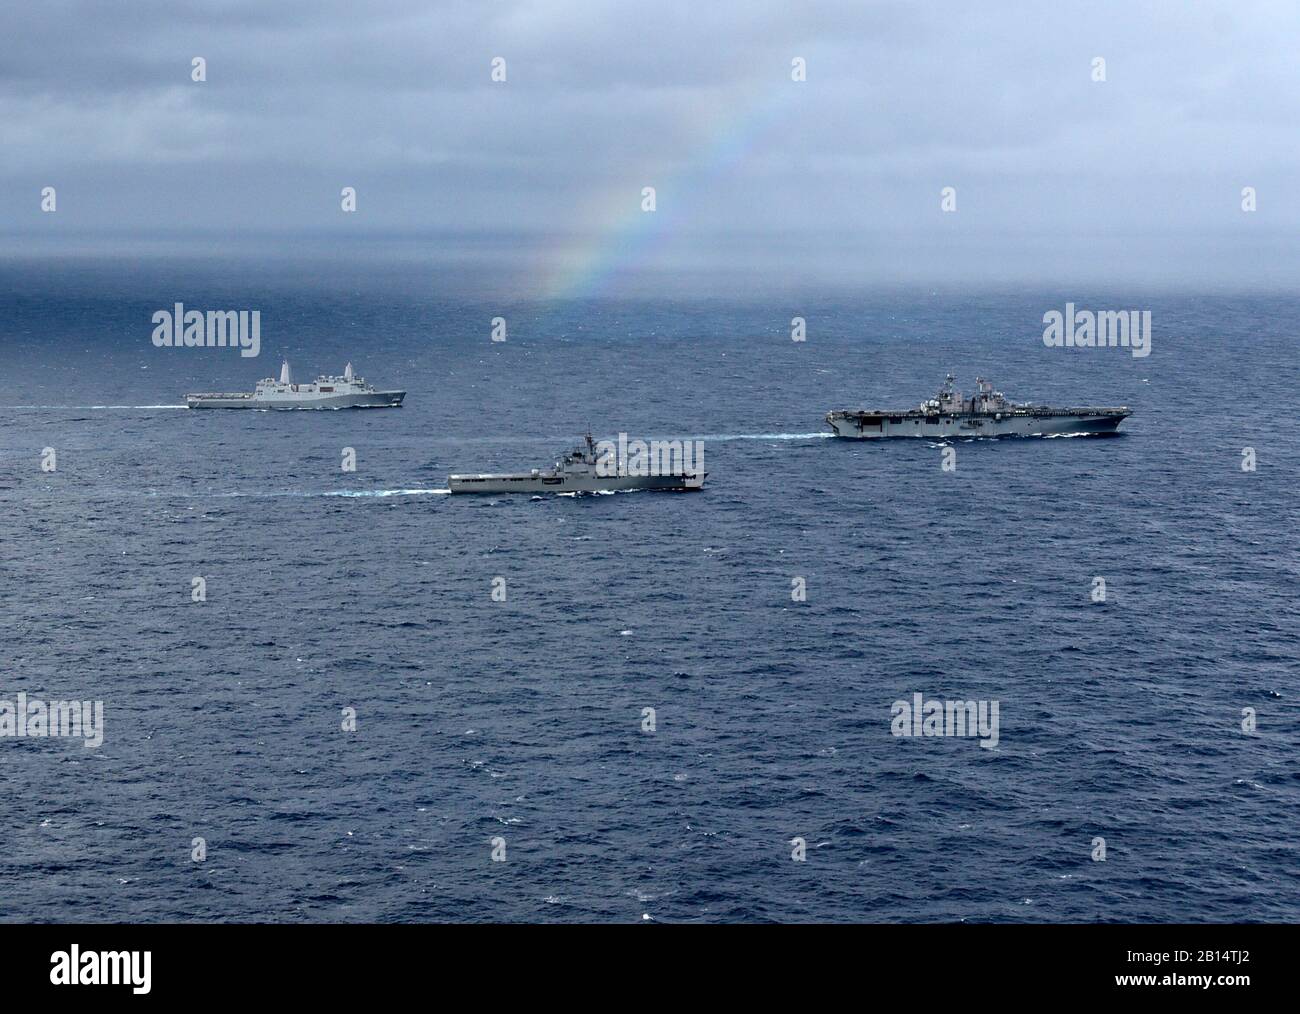 The amphibious transport dock ship USS Green Bay (LPD 20), Japan Maritime Self-Defense Force amphibious transport dock ship JS Kunisaki (LST 4003), and amphibious assault ship USS Wasp (LHD 1) transit in formation during a cooperative deployment in the East China Sea Jan. 12, 2019. The Wasp, flagship of Wasp Amphibious Ready Group, is operating in the Indo-Pacific region to enhance interoperability with partners and serve as a ready-response force for any type of contingency. (U.S. Navy photo by Mass Communication Specialist 1st Class Daniel Barker) Stock Photo